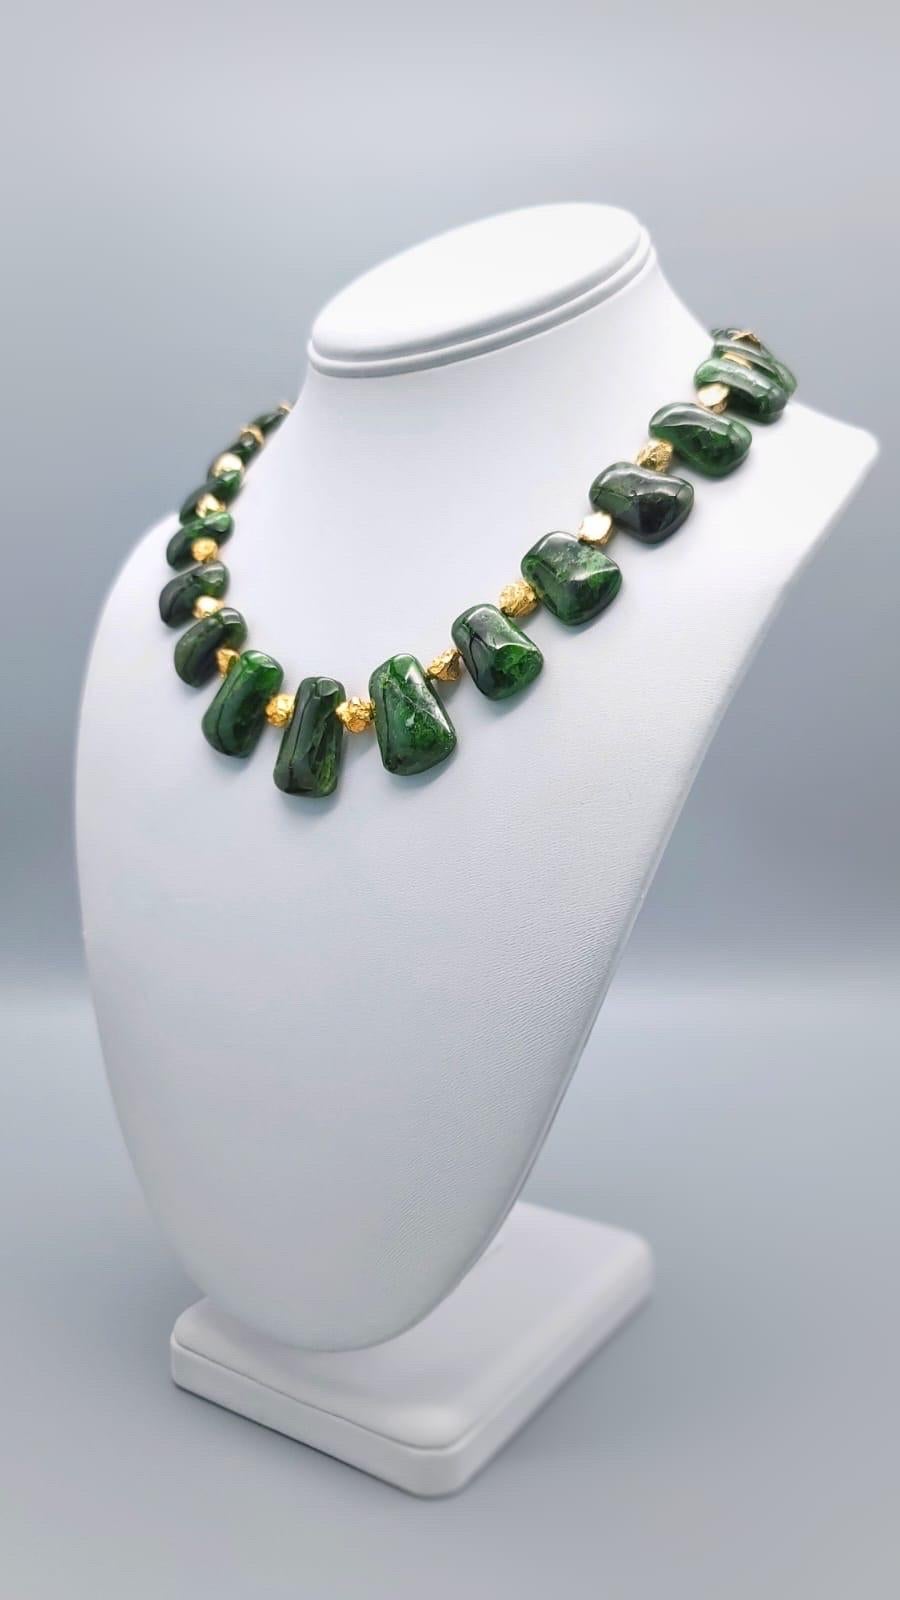 A.Jeschel Richly colored Chrome Diopside necklace 9